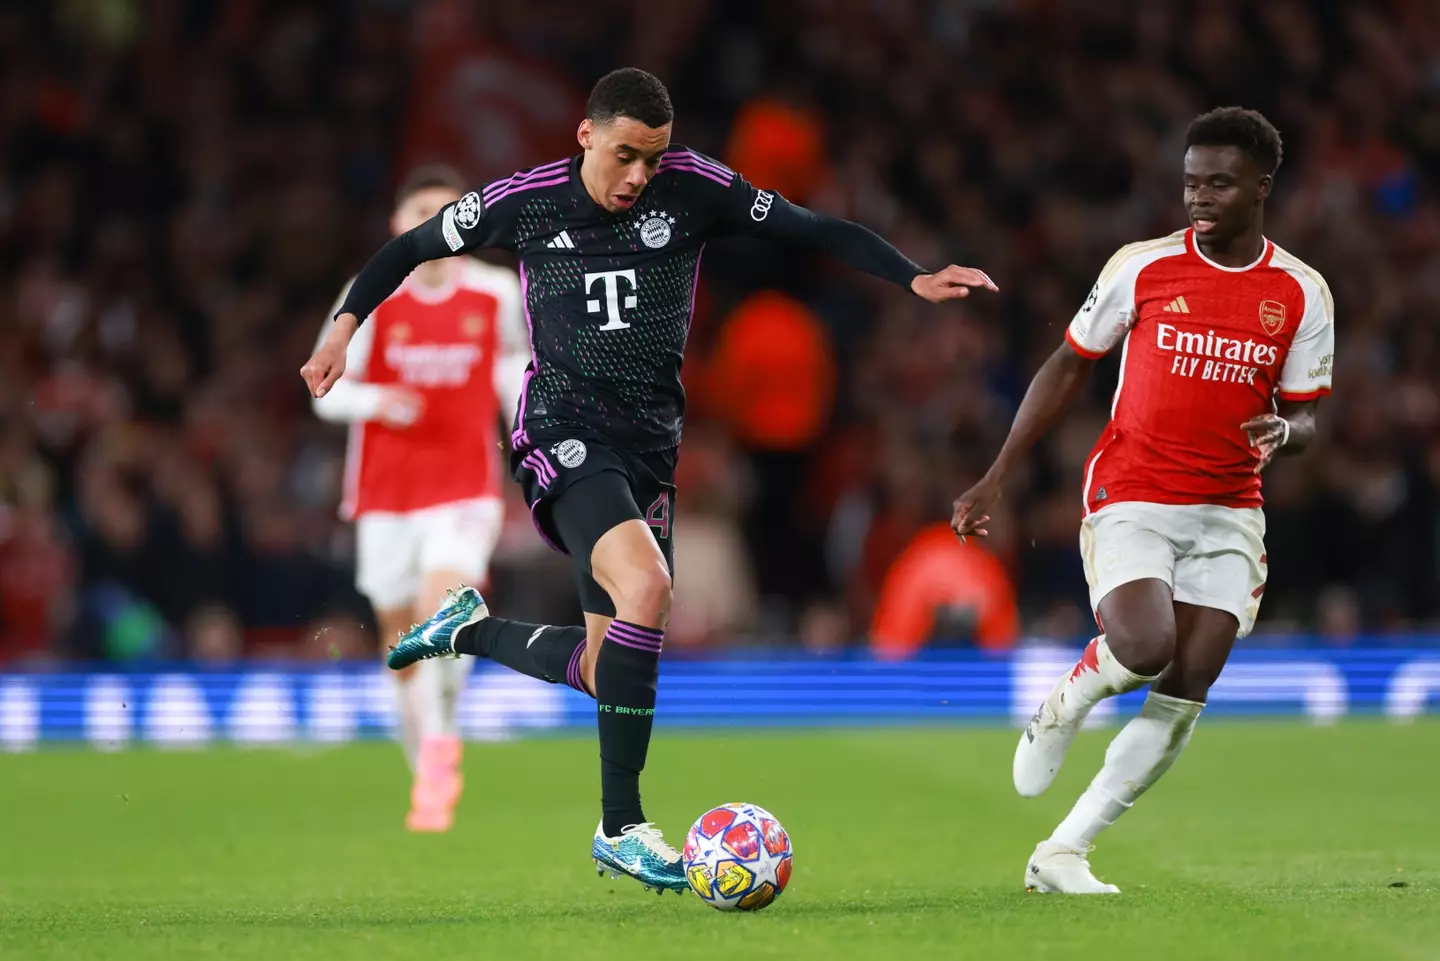 Jamal Musiala in action against Arsenal in the Champions League. Image: Getty